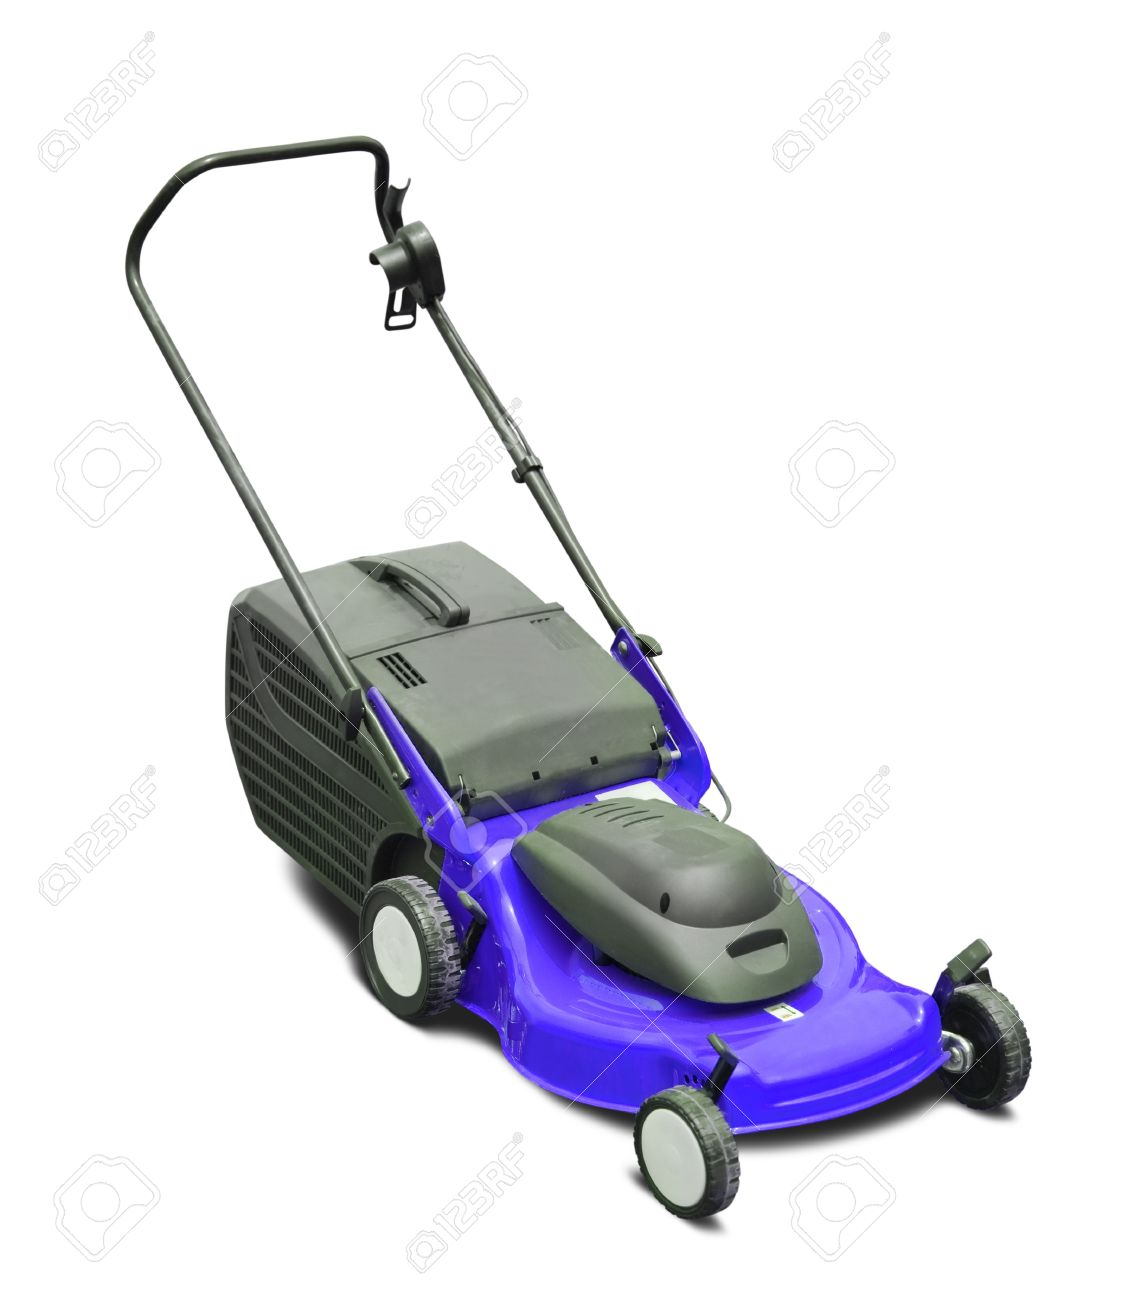 Blue Lawn Mower Isolated Over White Background Stock Photo